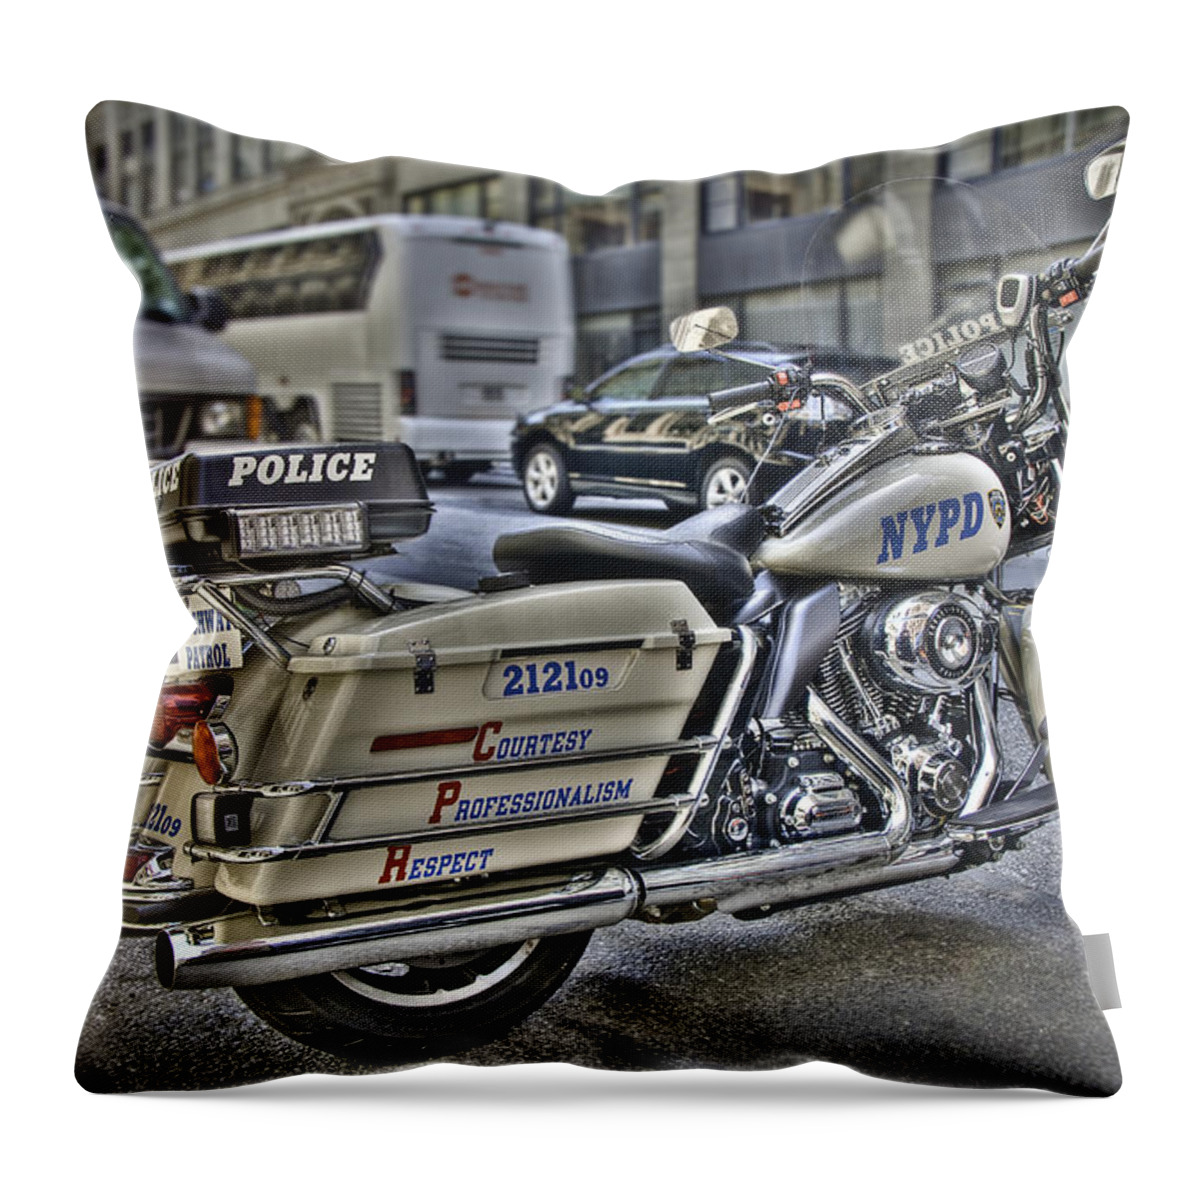 Davidson Throw Pillow featuring the photograph NYPD Highway Patrol by Andreas Freund